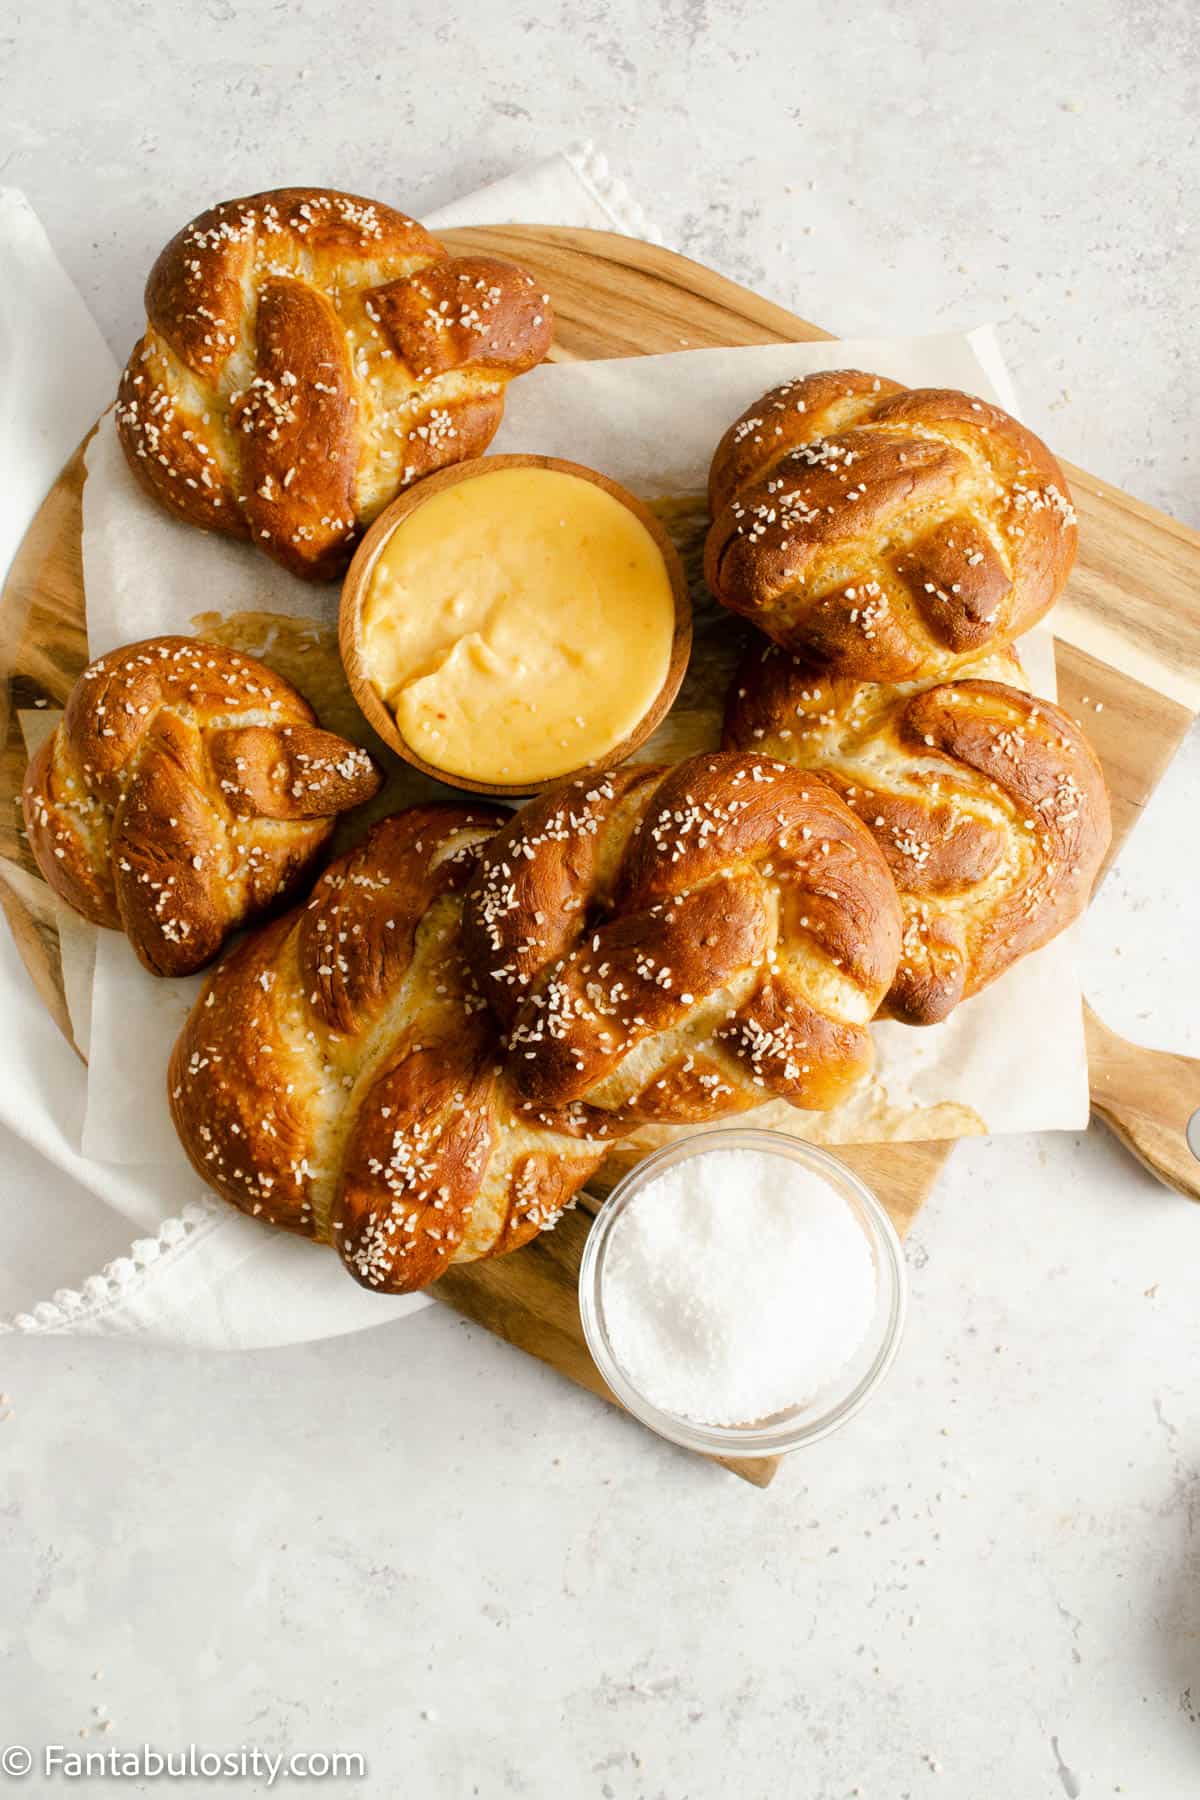 Pretzel cheese dip surrounded by soft pretzels on a wood tray.